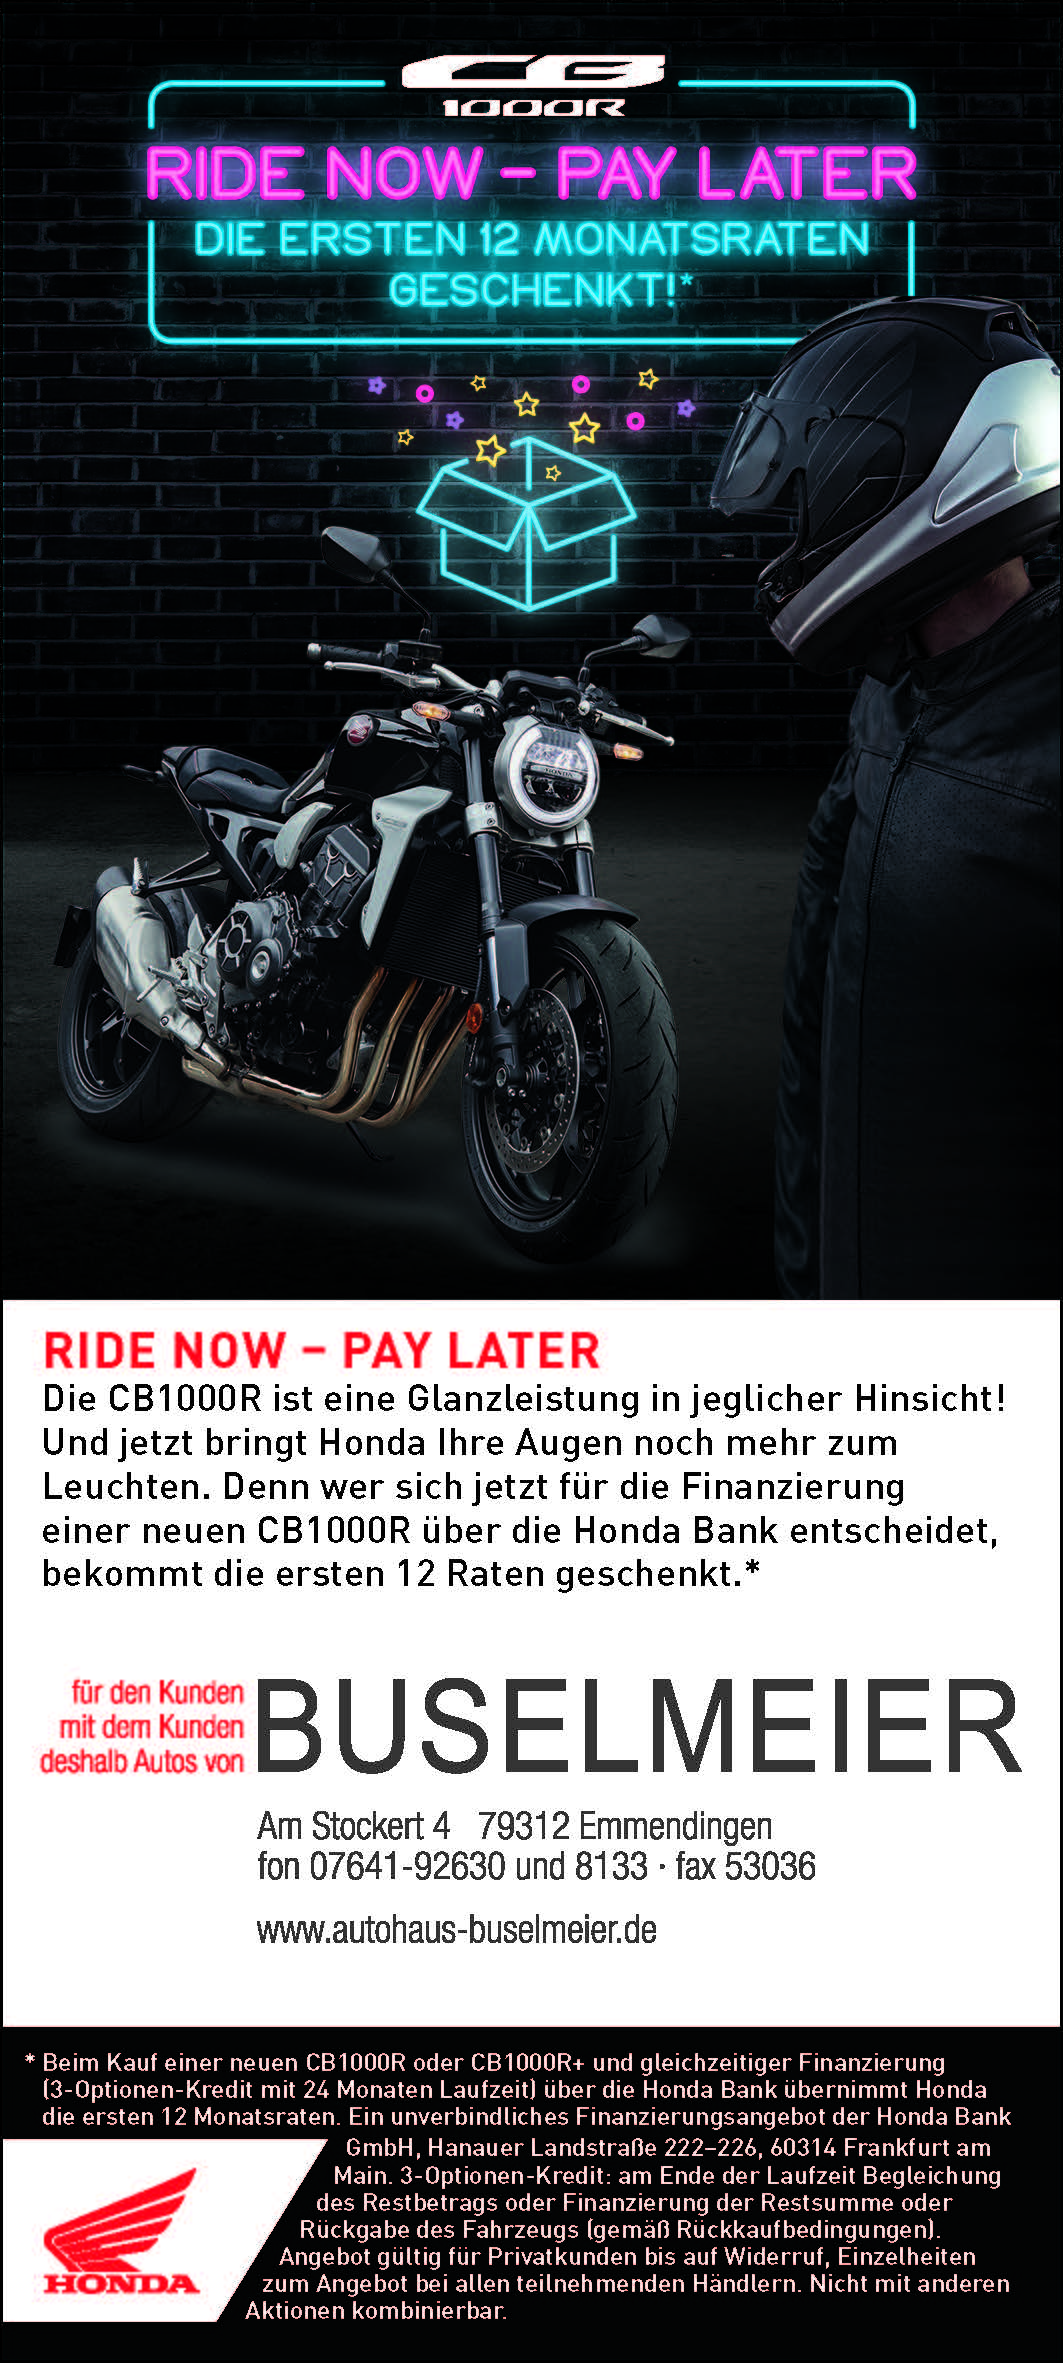 RIDE NOW – PAY LATER